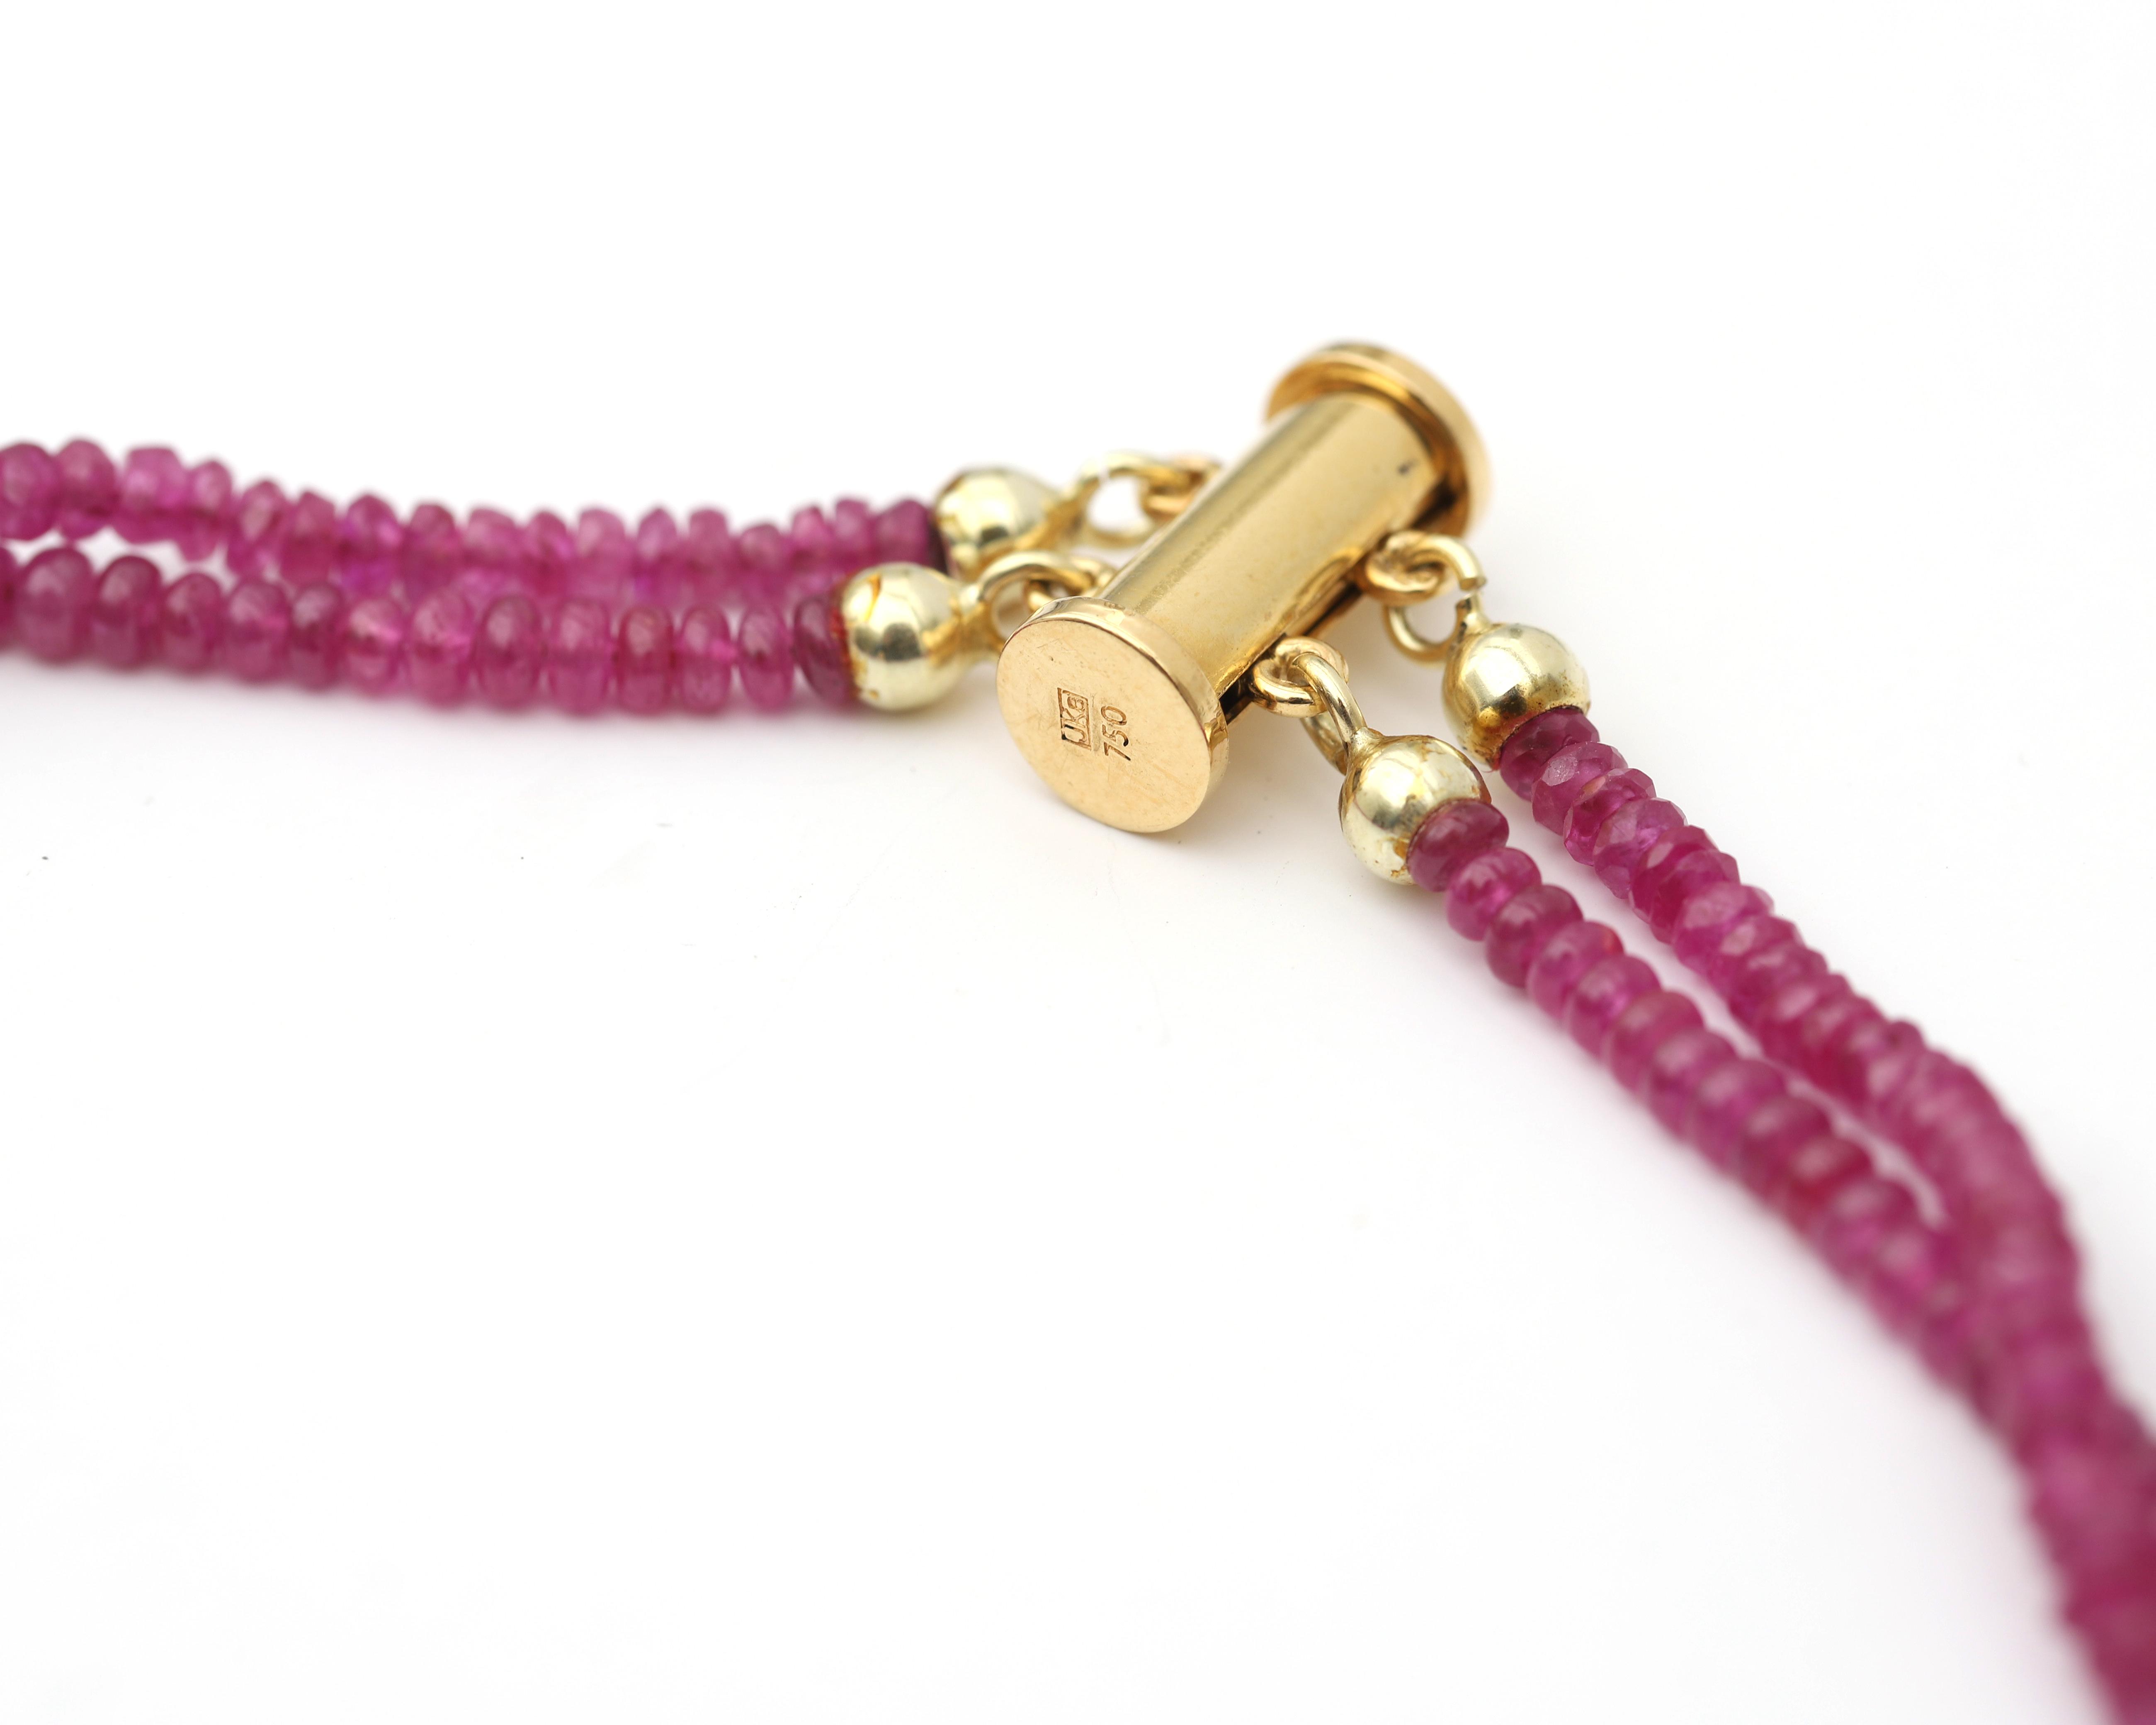 A double strung string of rubies on 18 karat gold magnetic lock - Image 2 of 3